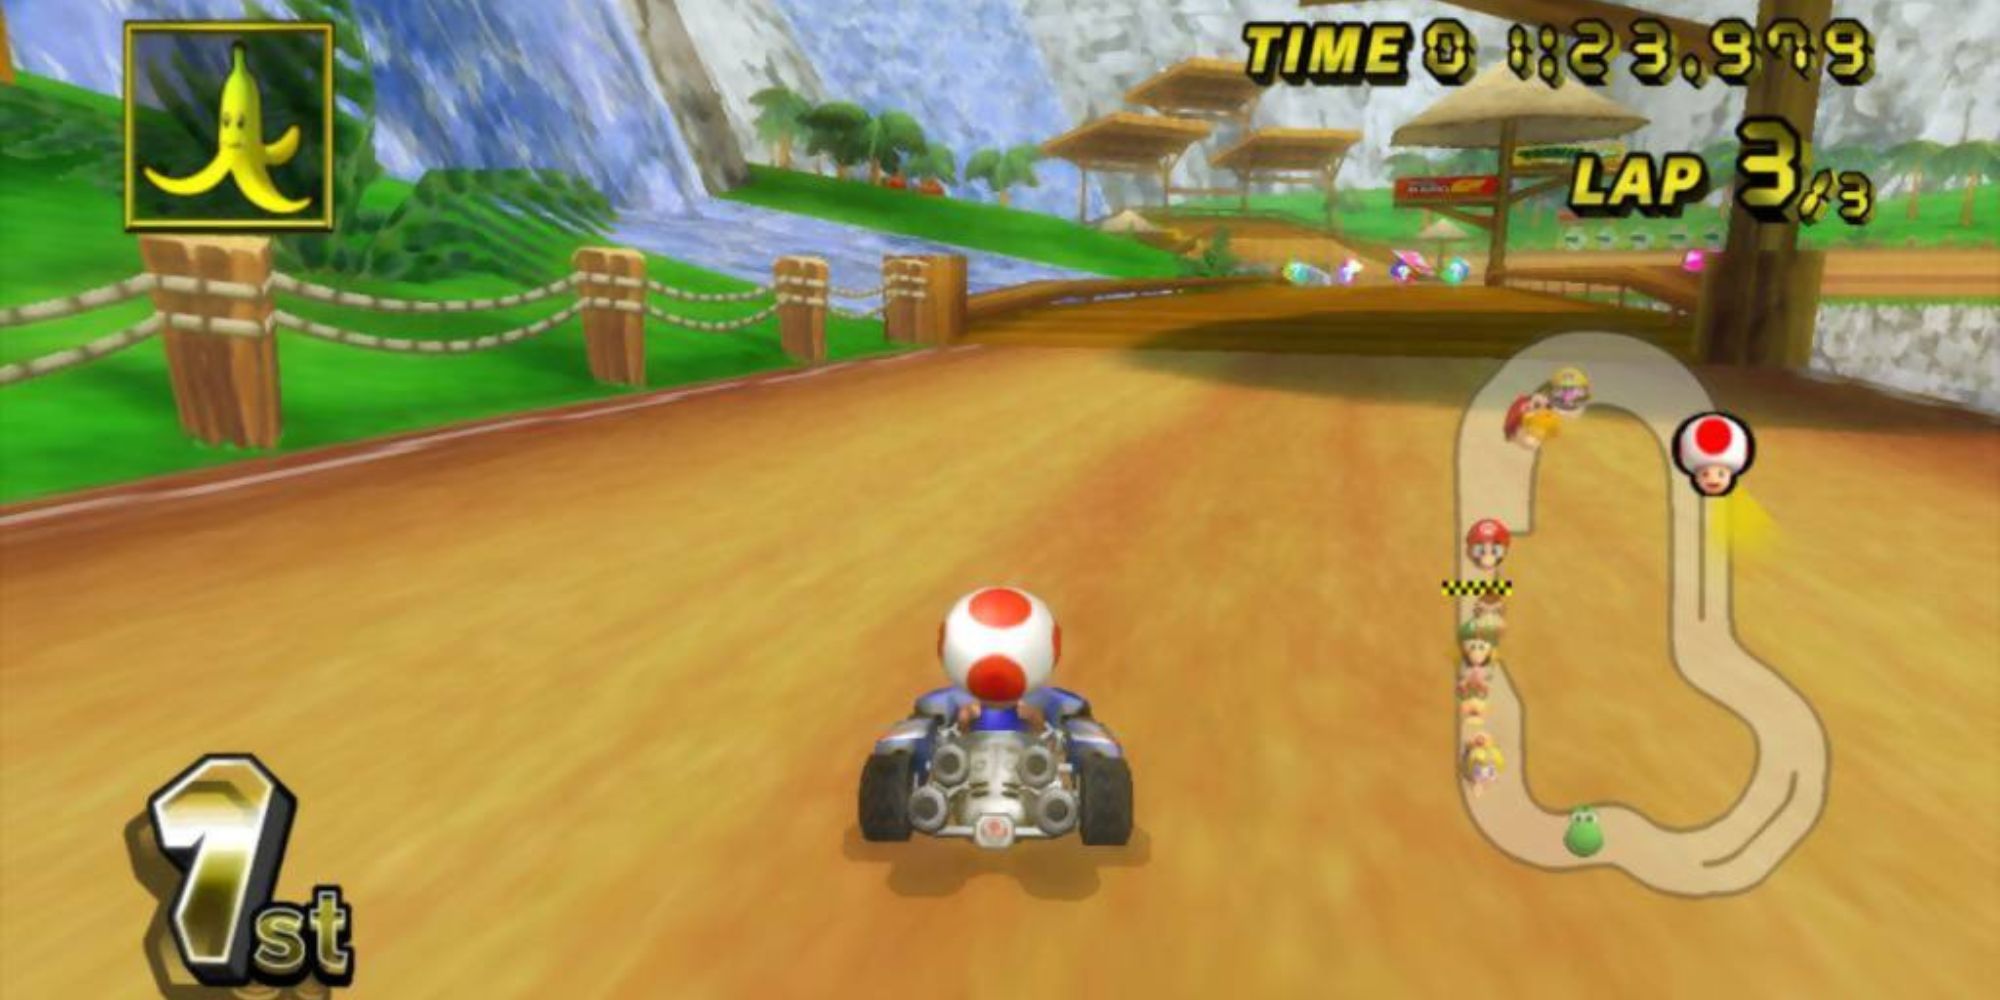 Toad drives through Yoshi Falls in first place